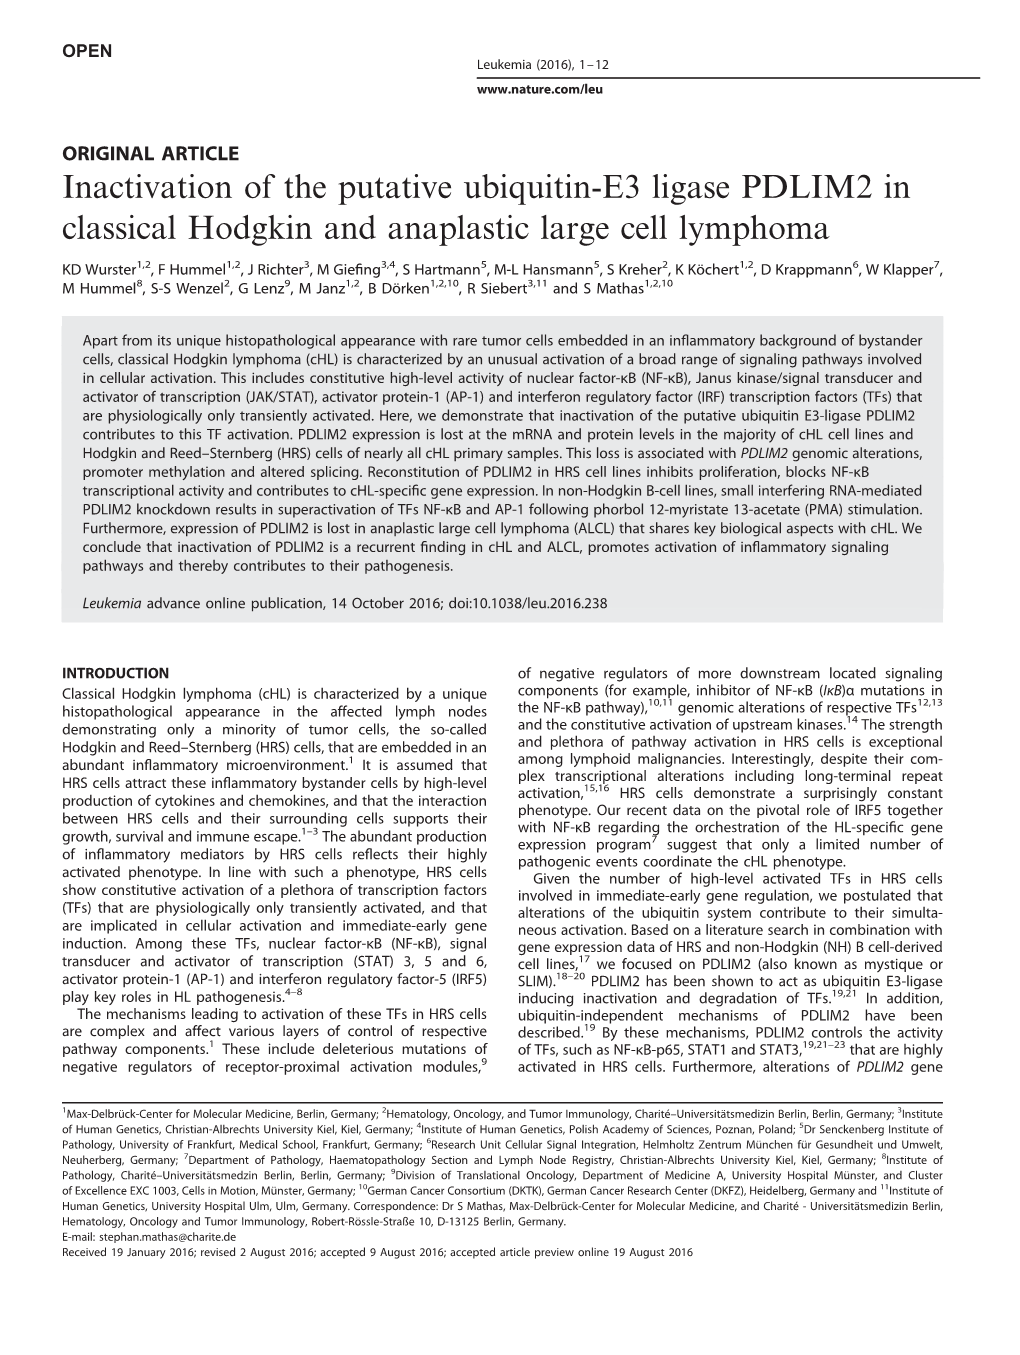 Inactivation of the Putative Ubiquitin-E3 Ligase PDLIM2 in Classical Hodgkin and Anaplastic Large Cell Lymphoma